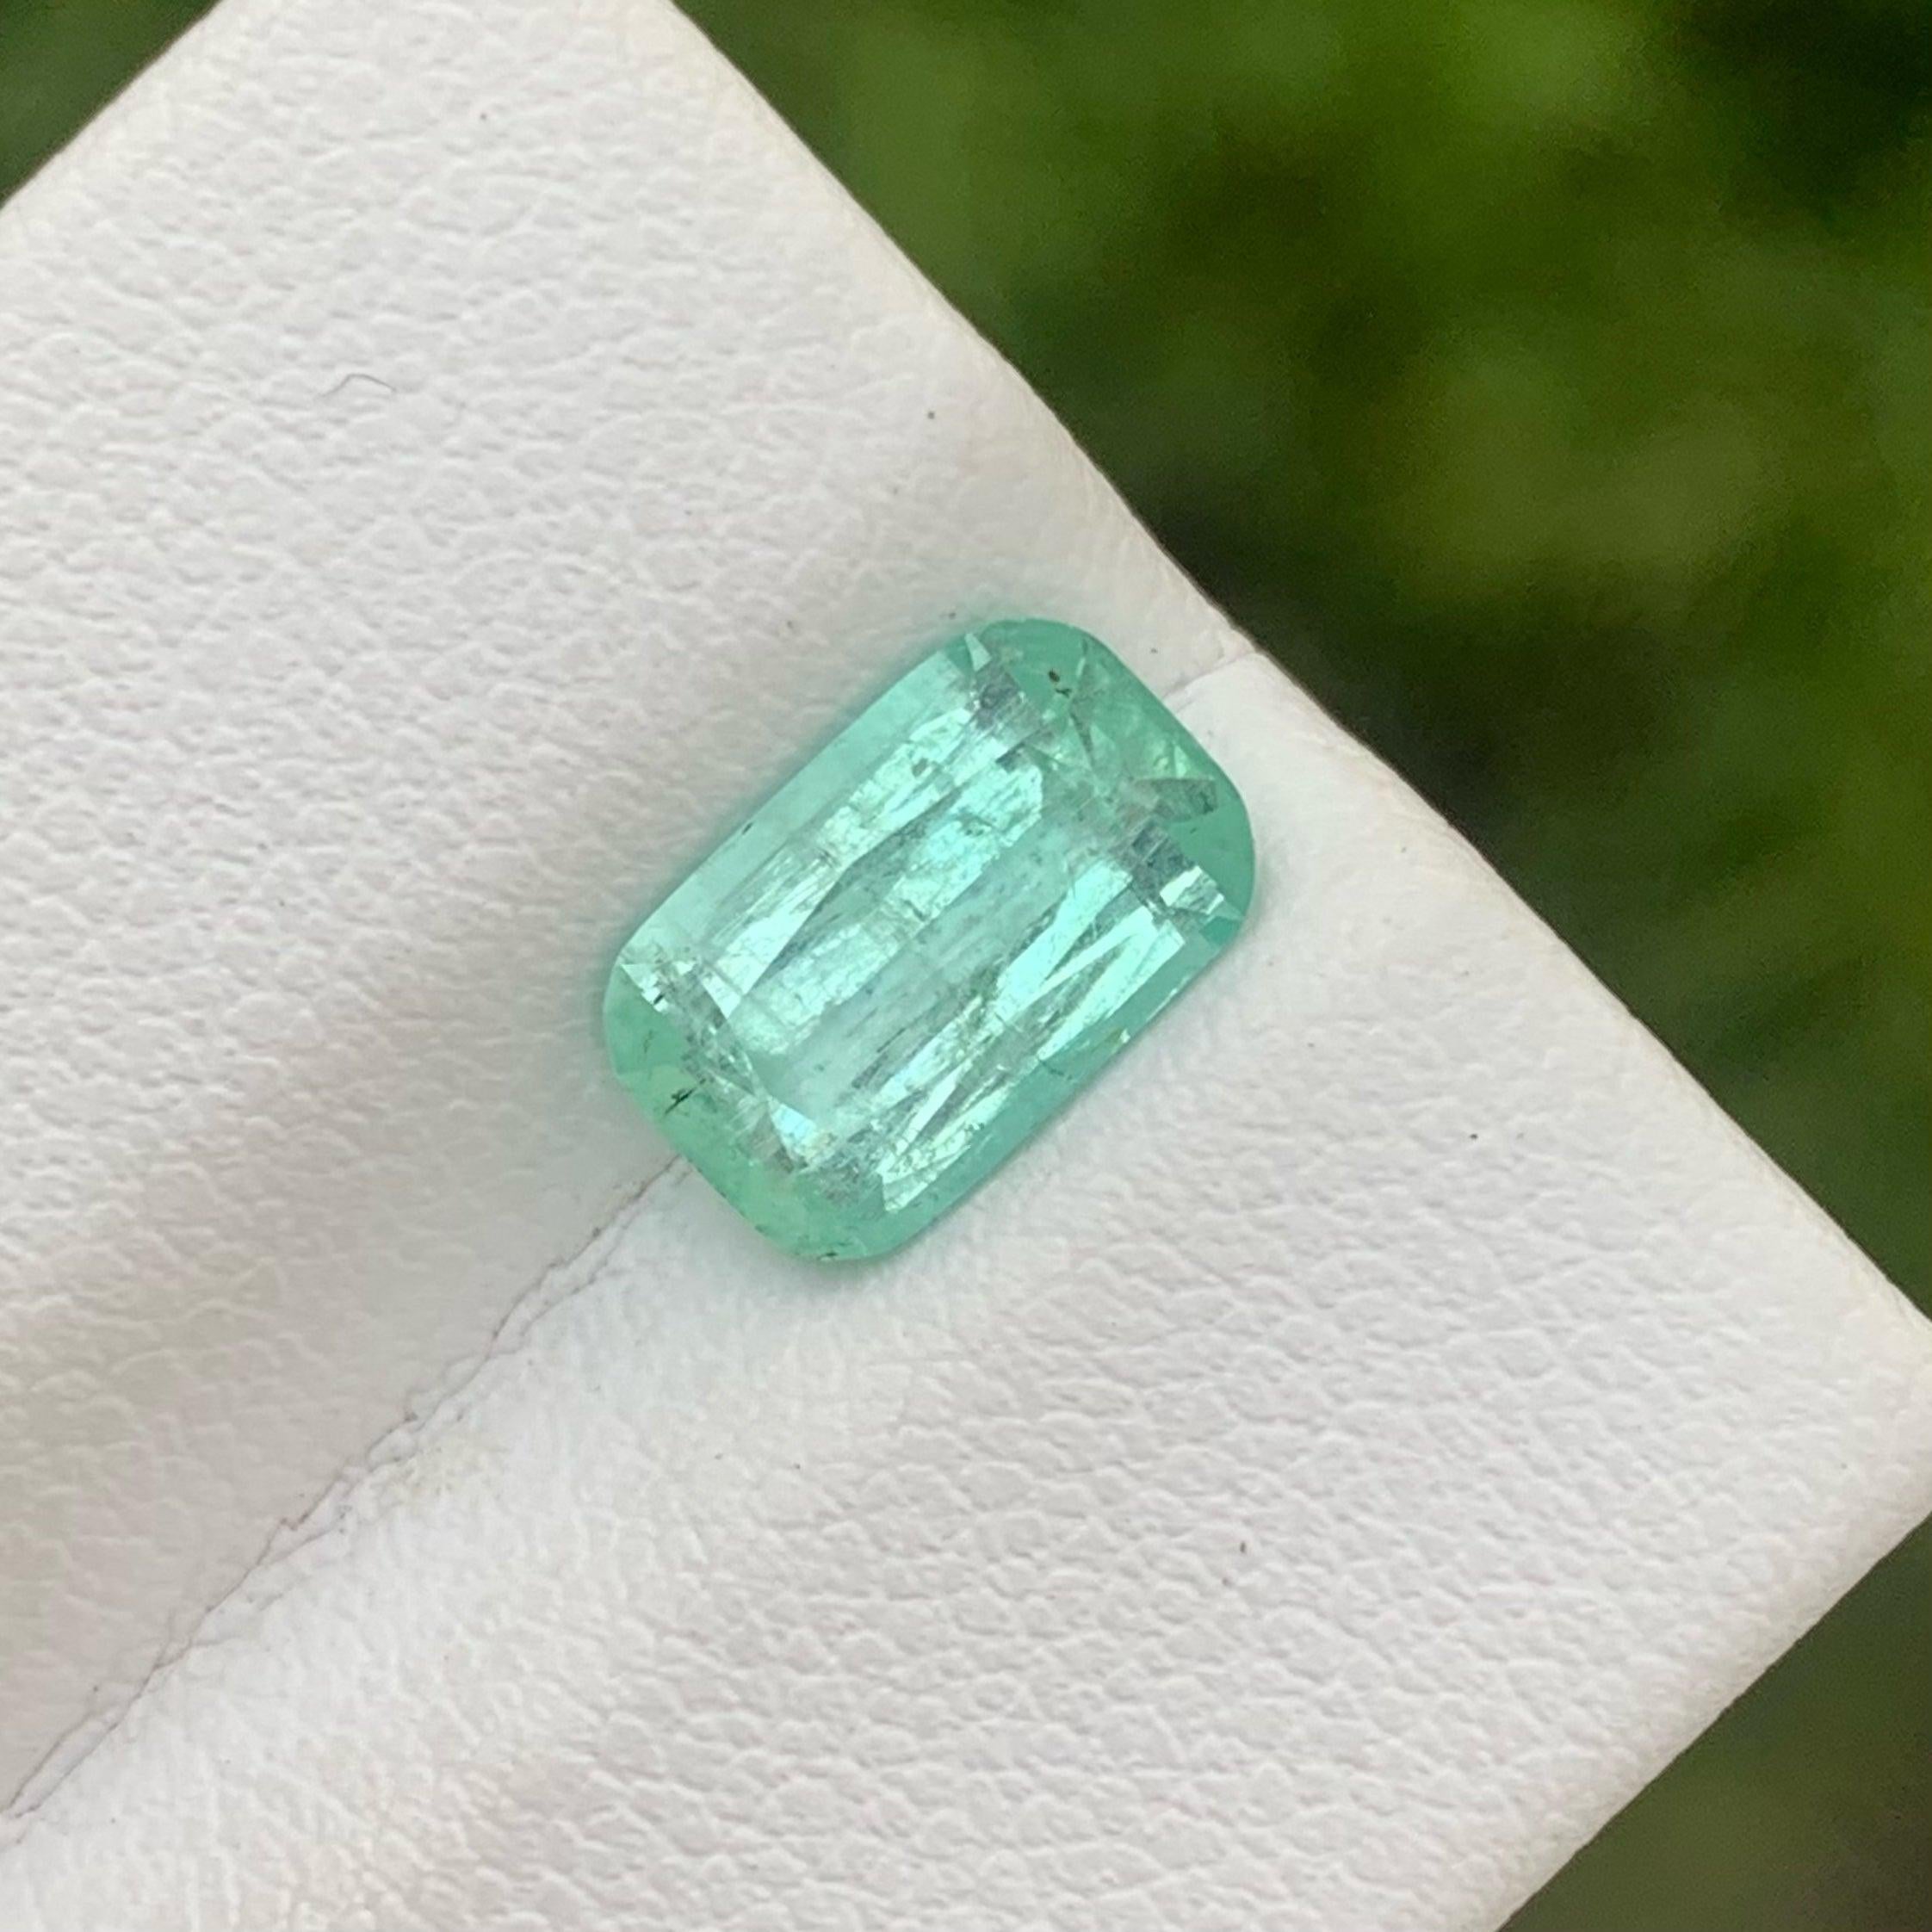 Natural Light Green Emerald Gemstone, Available For Sale At wholesale Price Natural High Quality, 1.95 Carats Loose Emerald From Afghanistan.

Product Information:
GEMSTONE TYPE: Natural Pastel Green Emerald Stone
WEIGHT: 1.95 Carats
DIMENSIONS: 9.9